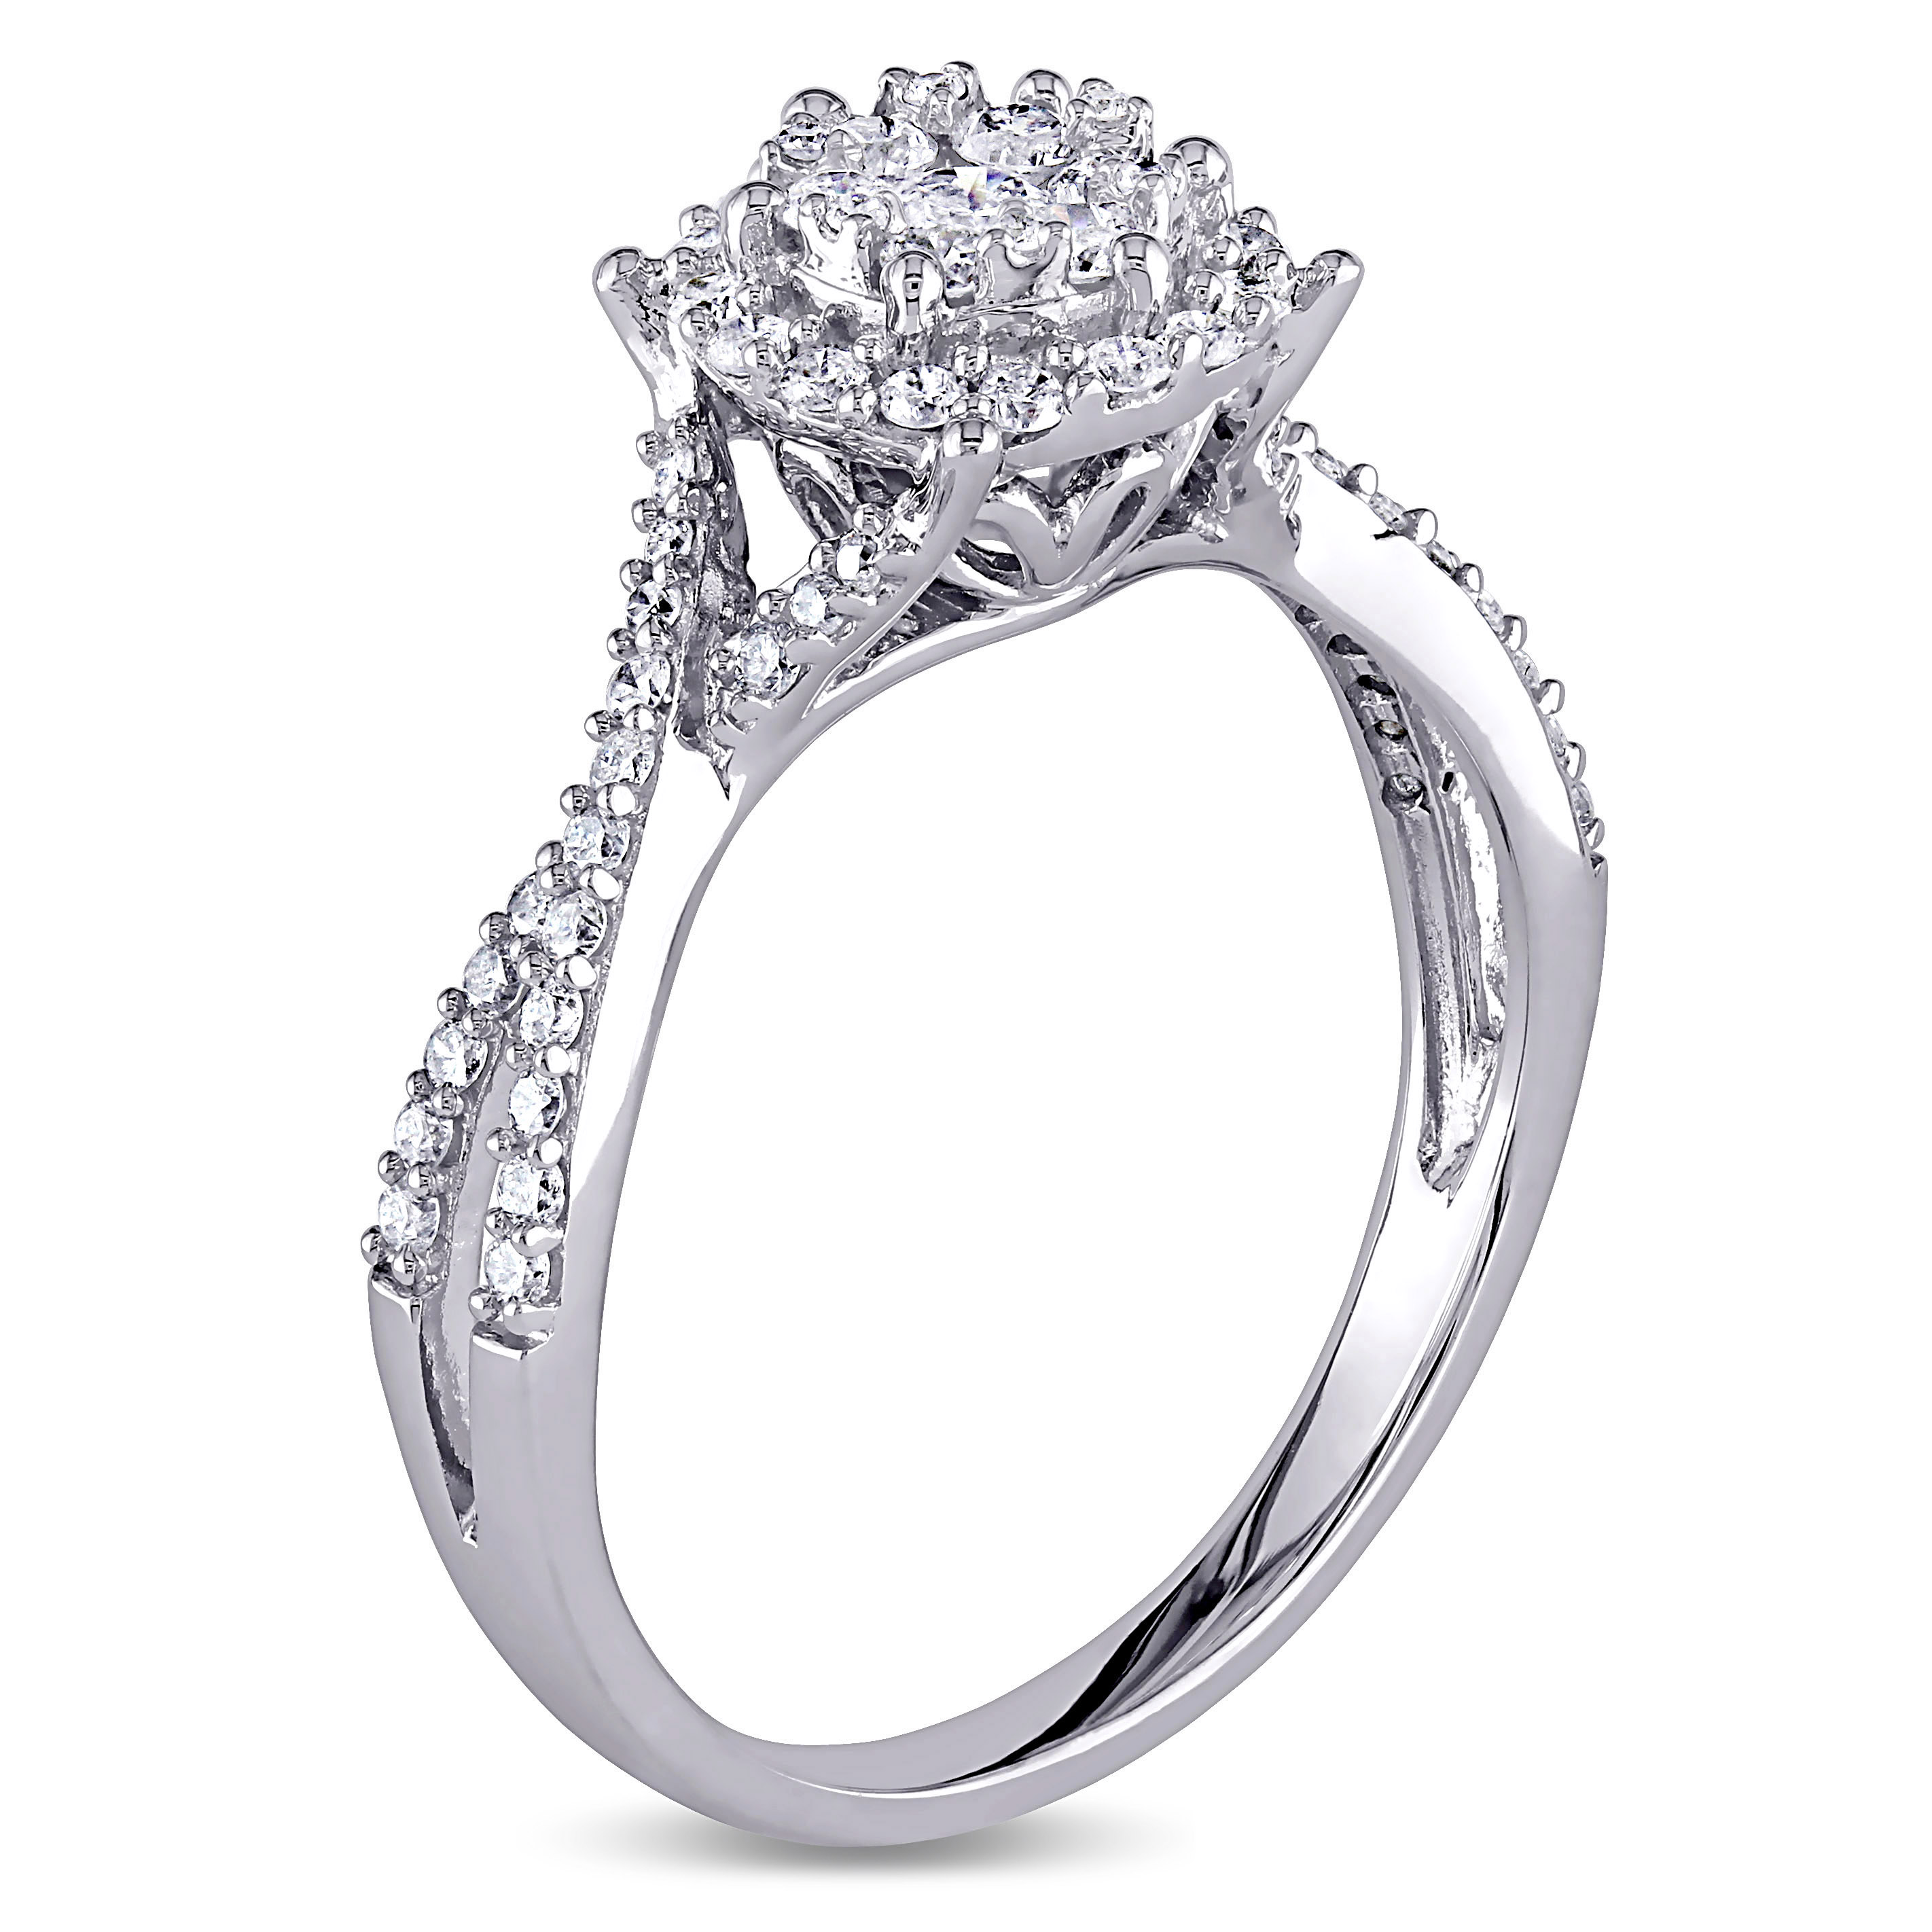 1/2 CT TW Halo Diamond Engagement Ring in 10k White Gold